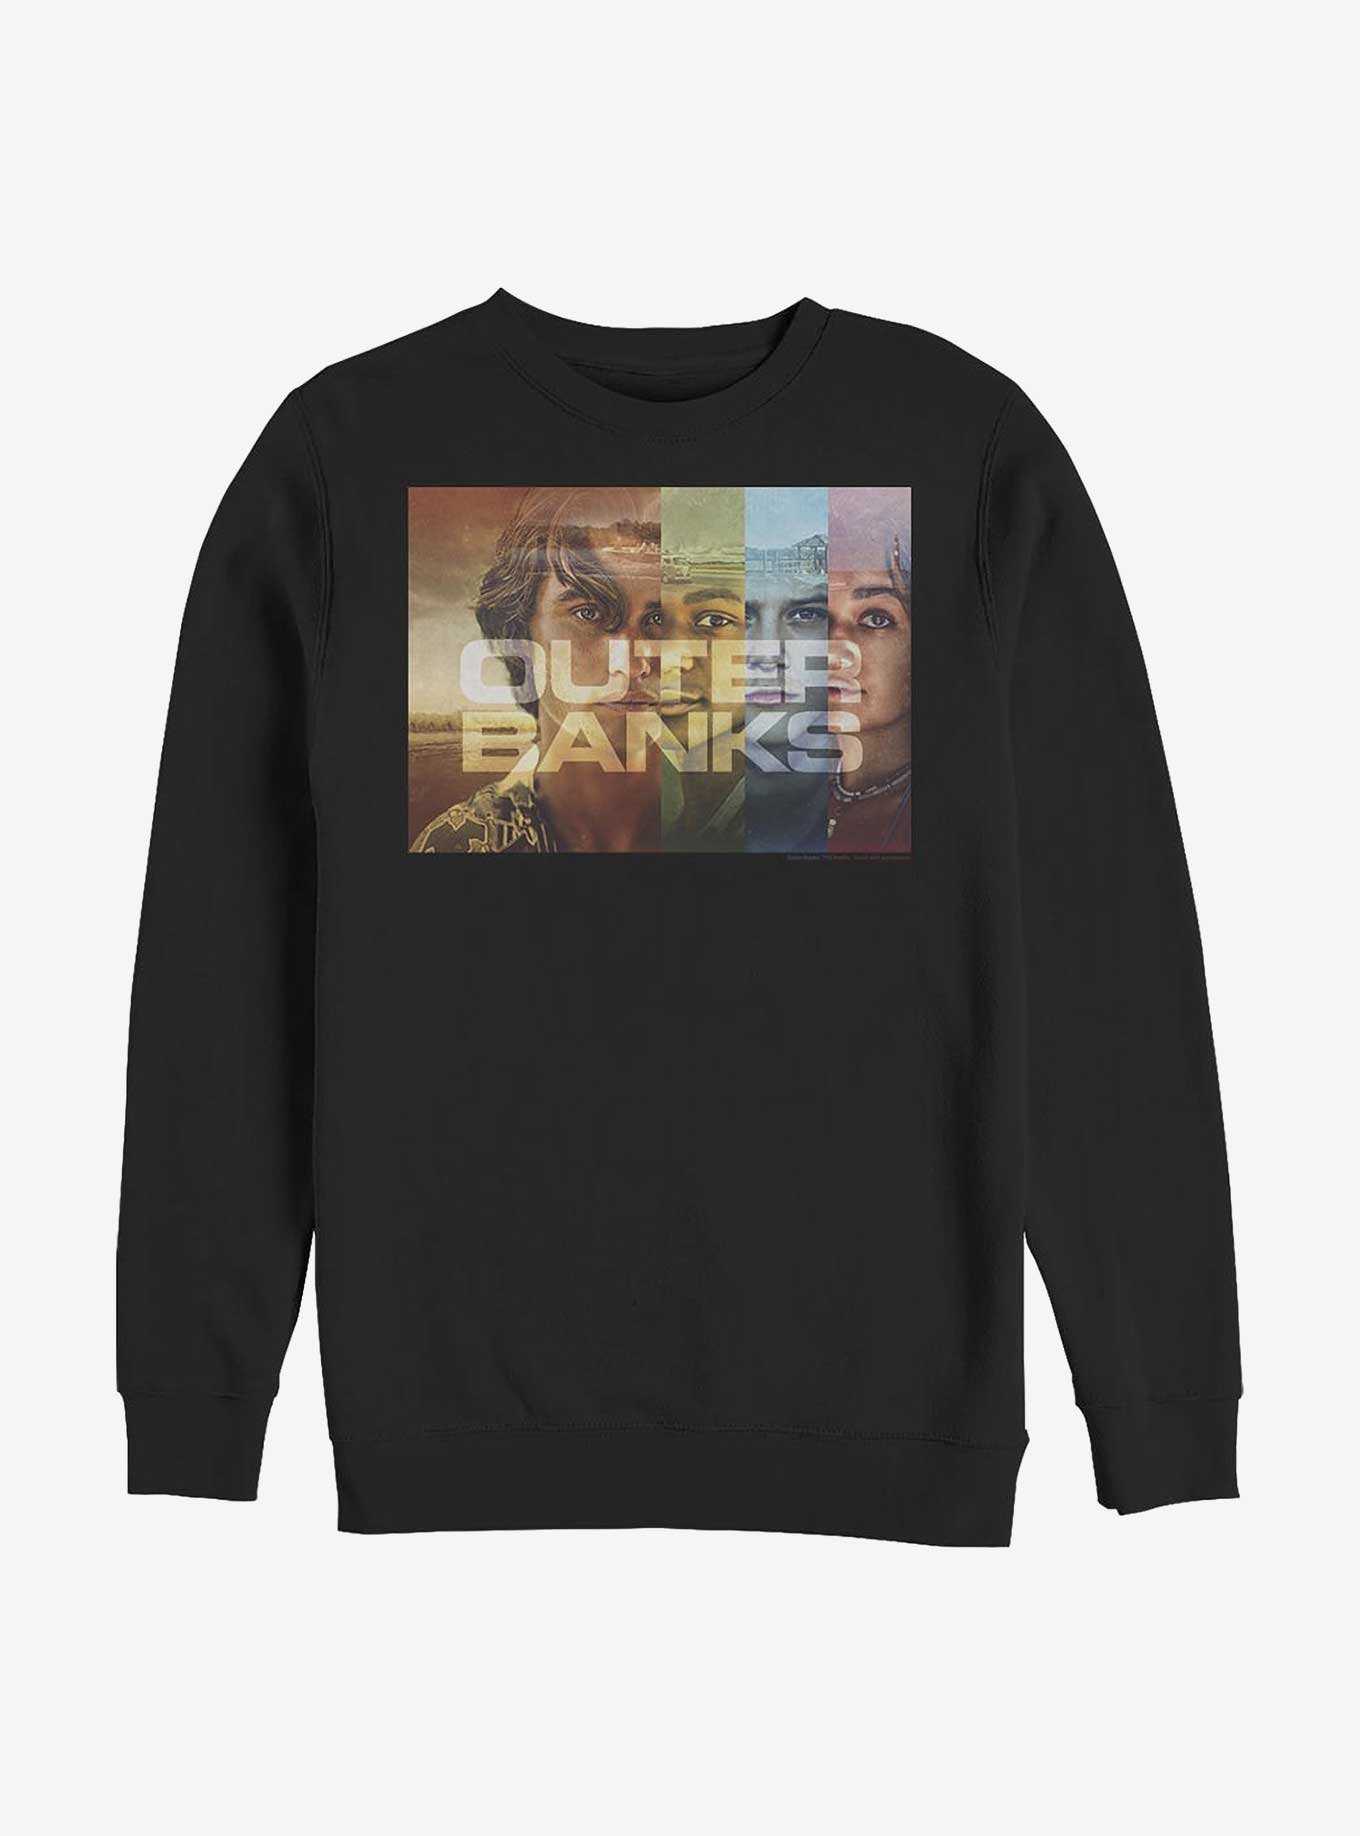 Outer Banks Cover Poster Sweatshirt, , hi-res